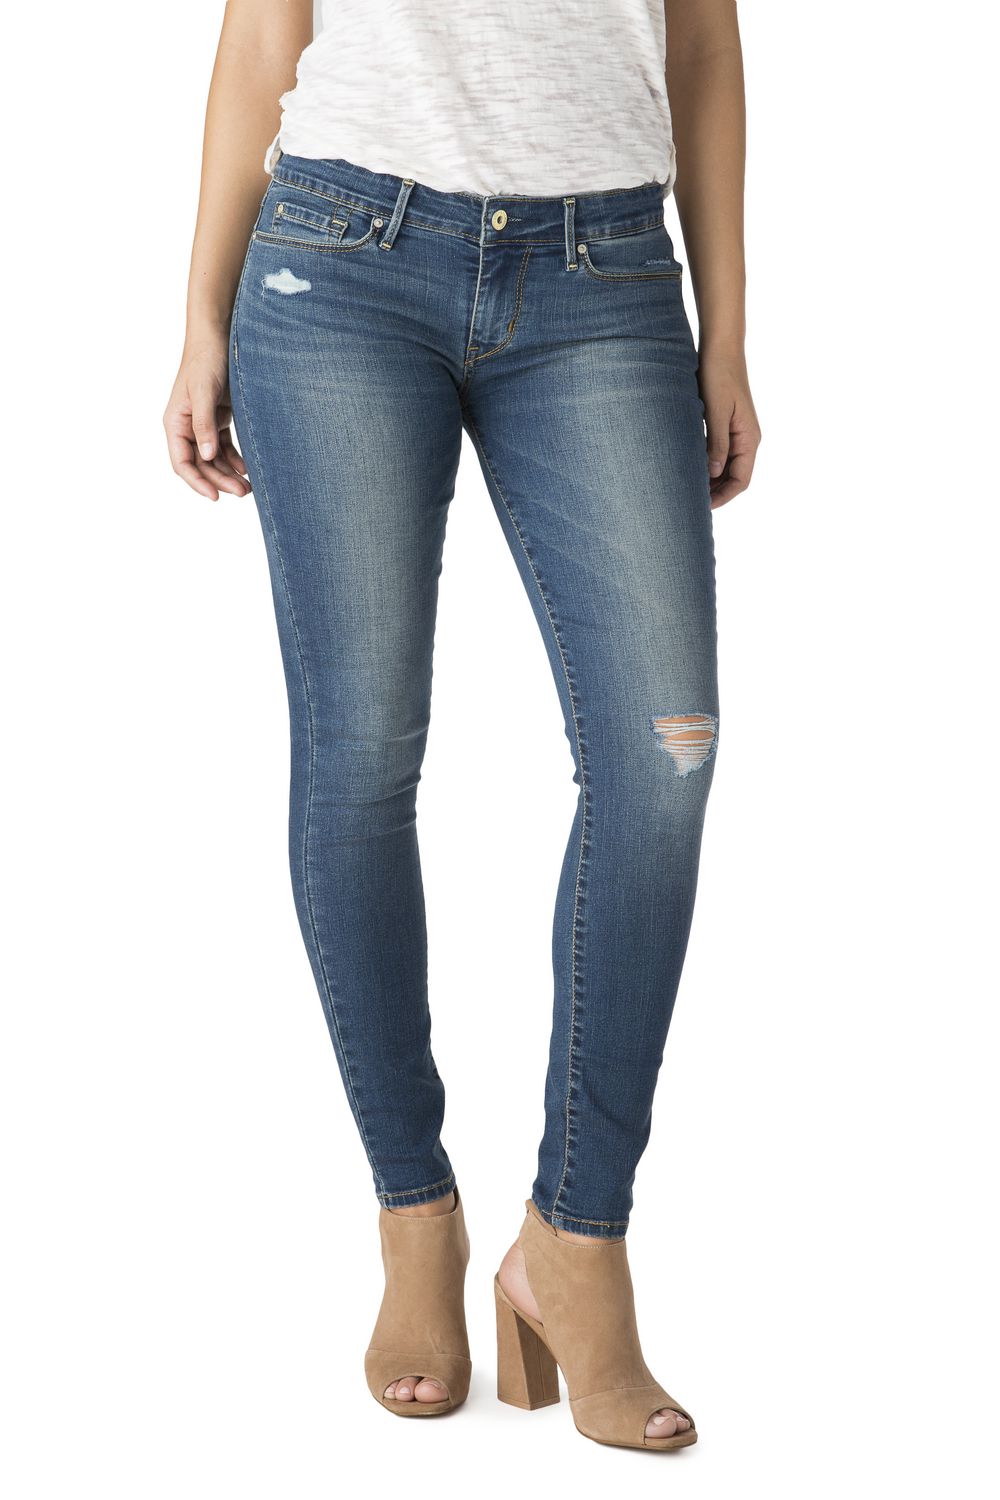 Signature by Levi Strauss & Co.™ Women's Low-Rise Jegging 